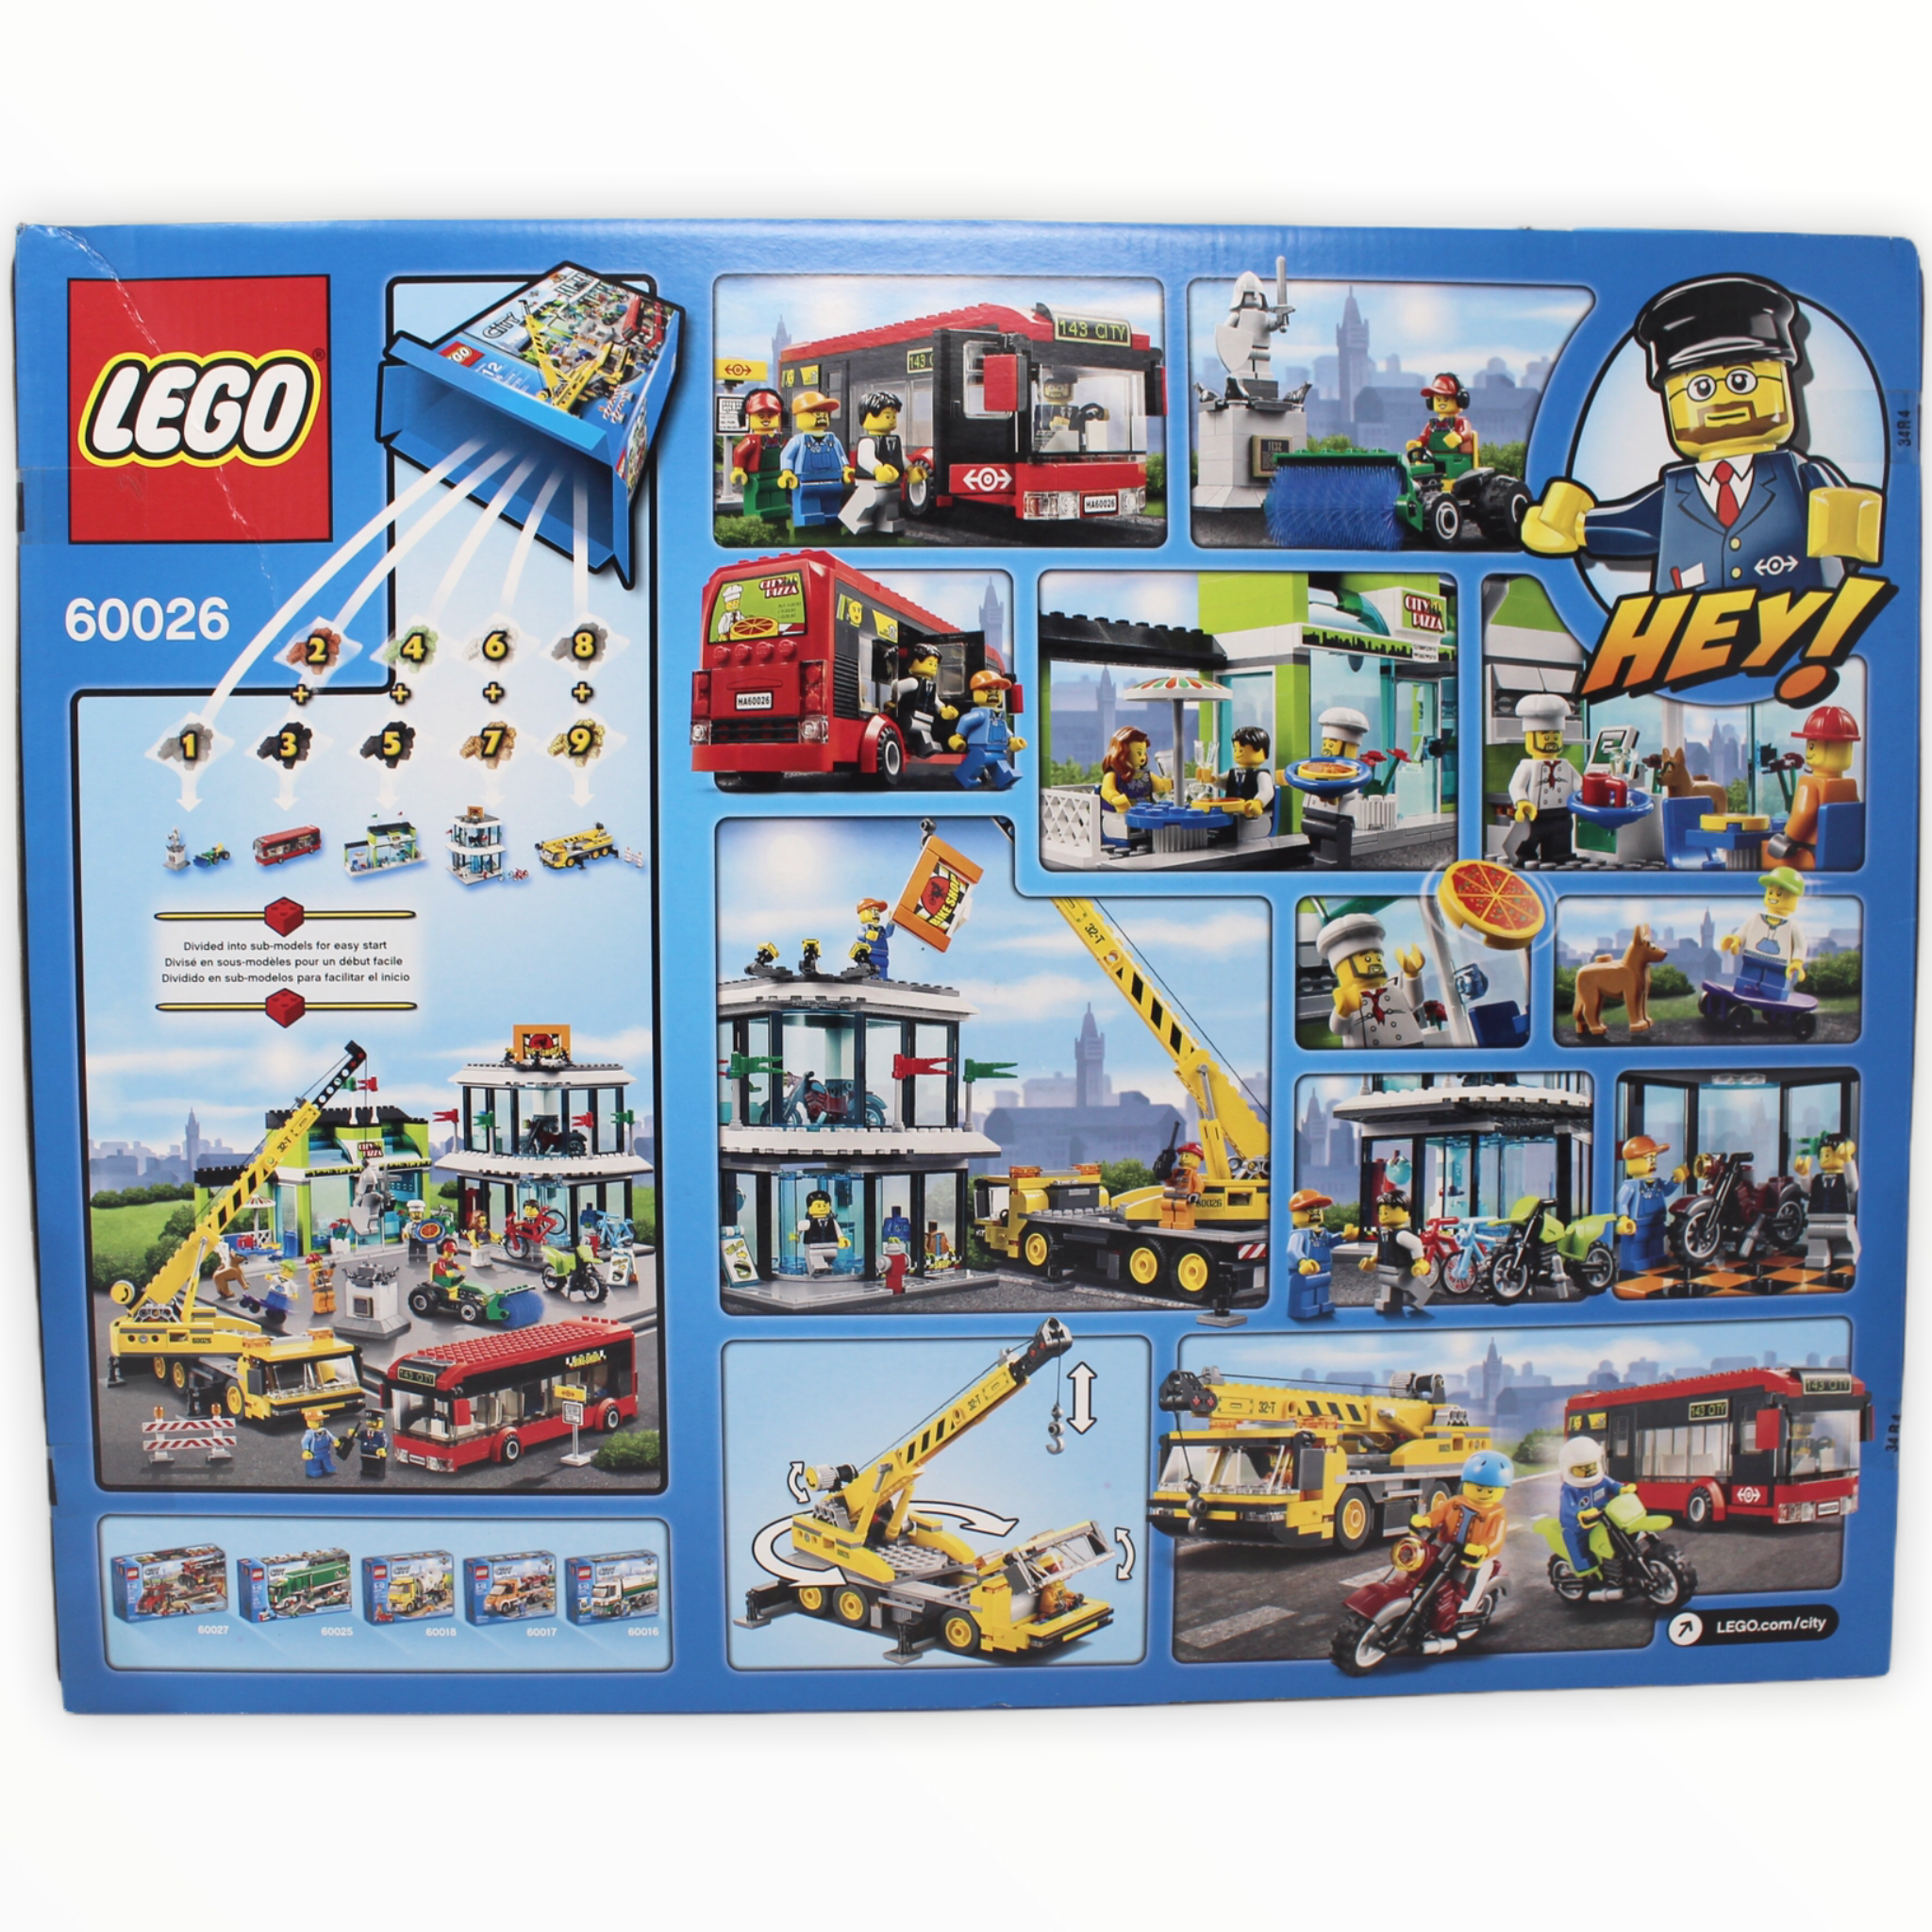 Retired Set 60026 City Town Square